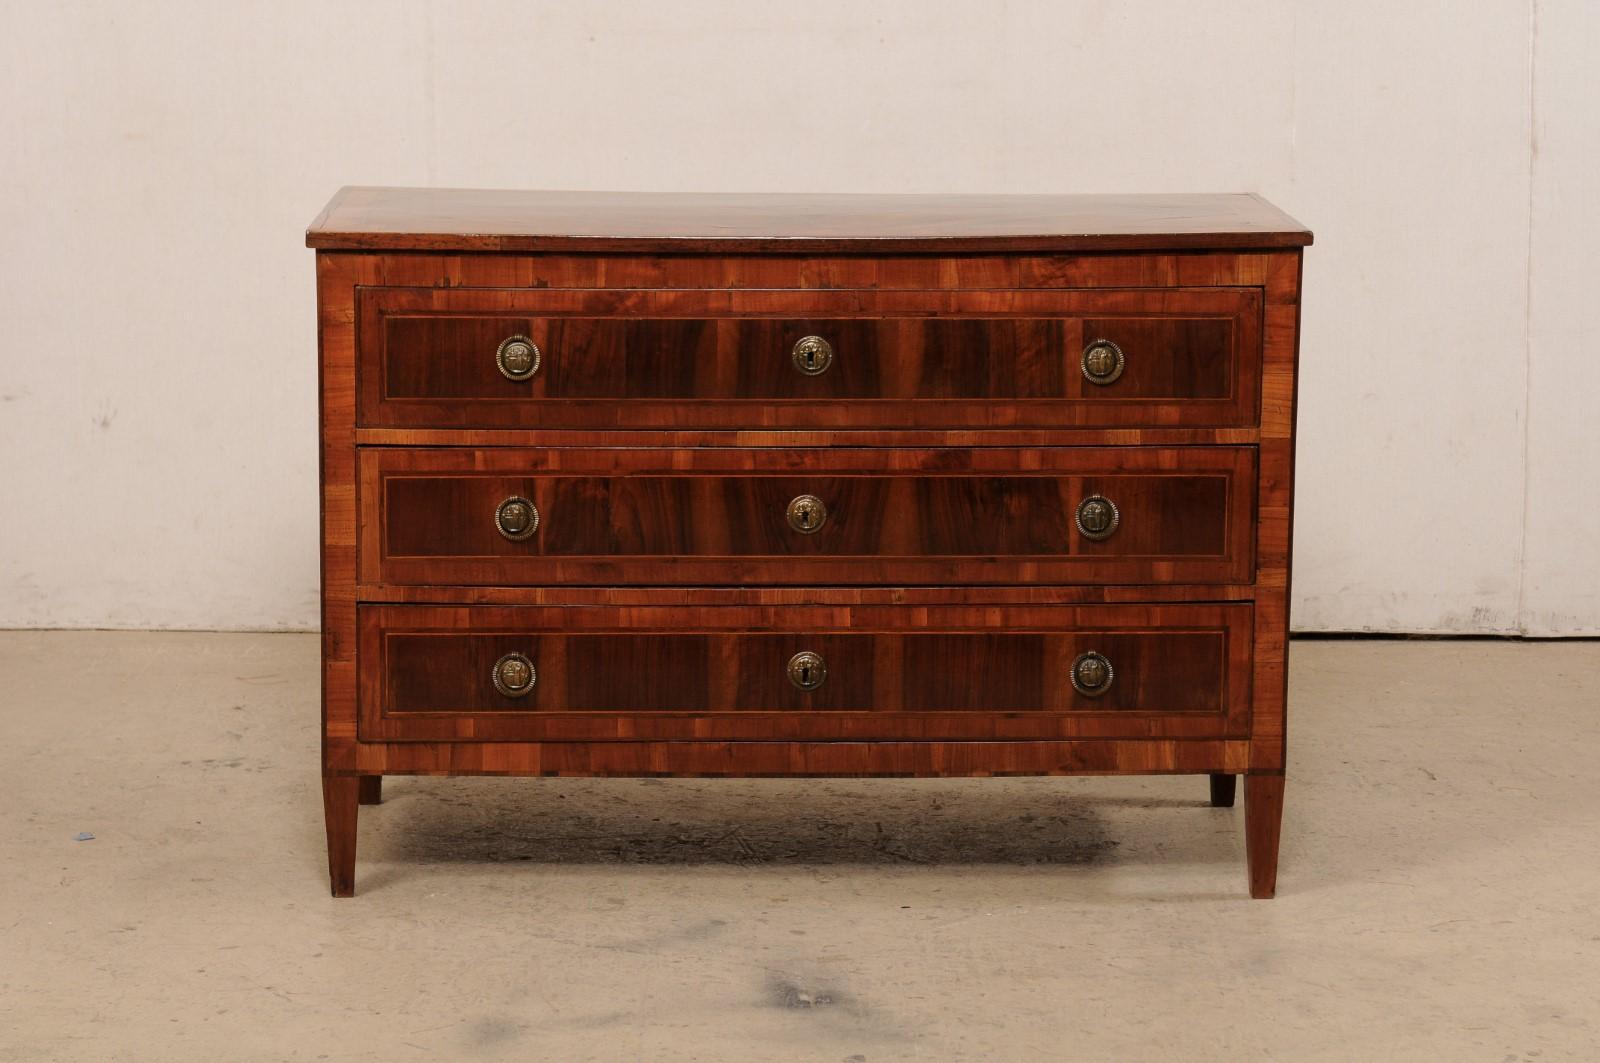 French Empire Commode with Beautiful Inlay & Bookmatched Veneer, Early 19th C. For Sale 7